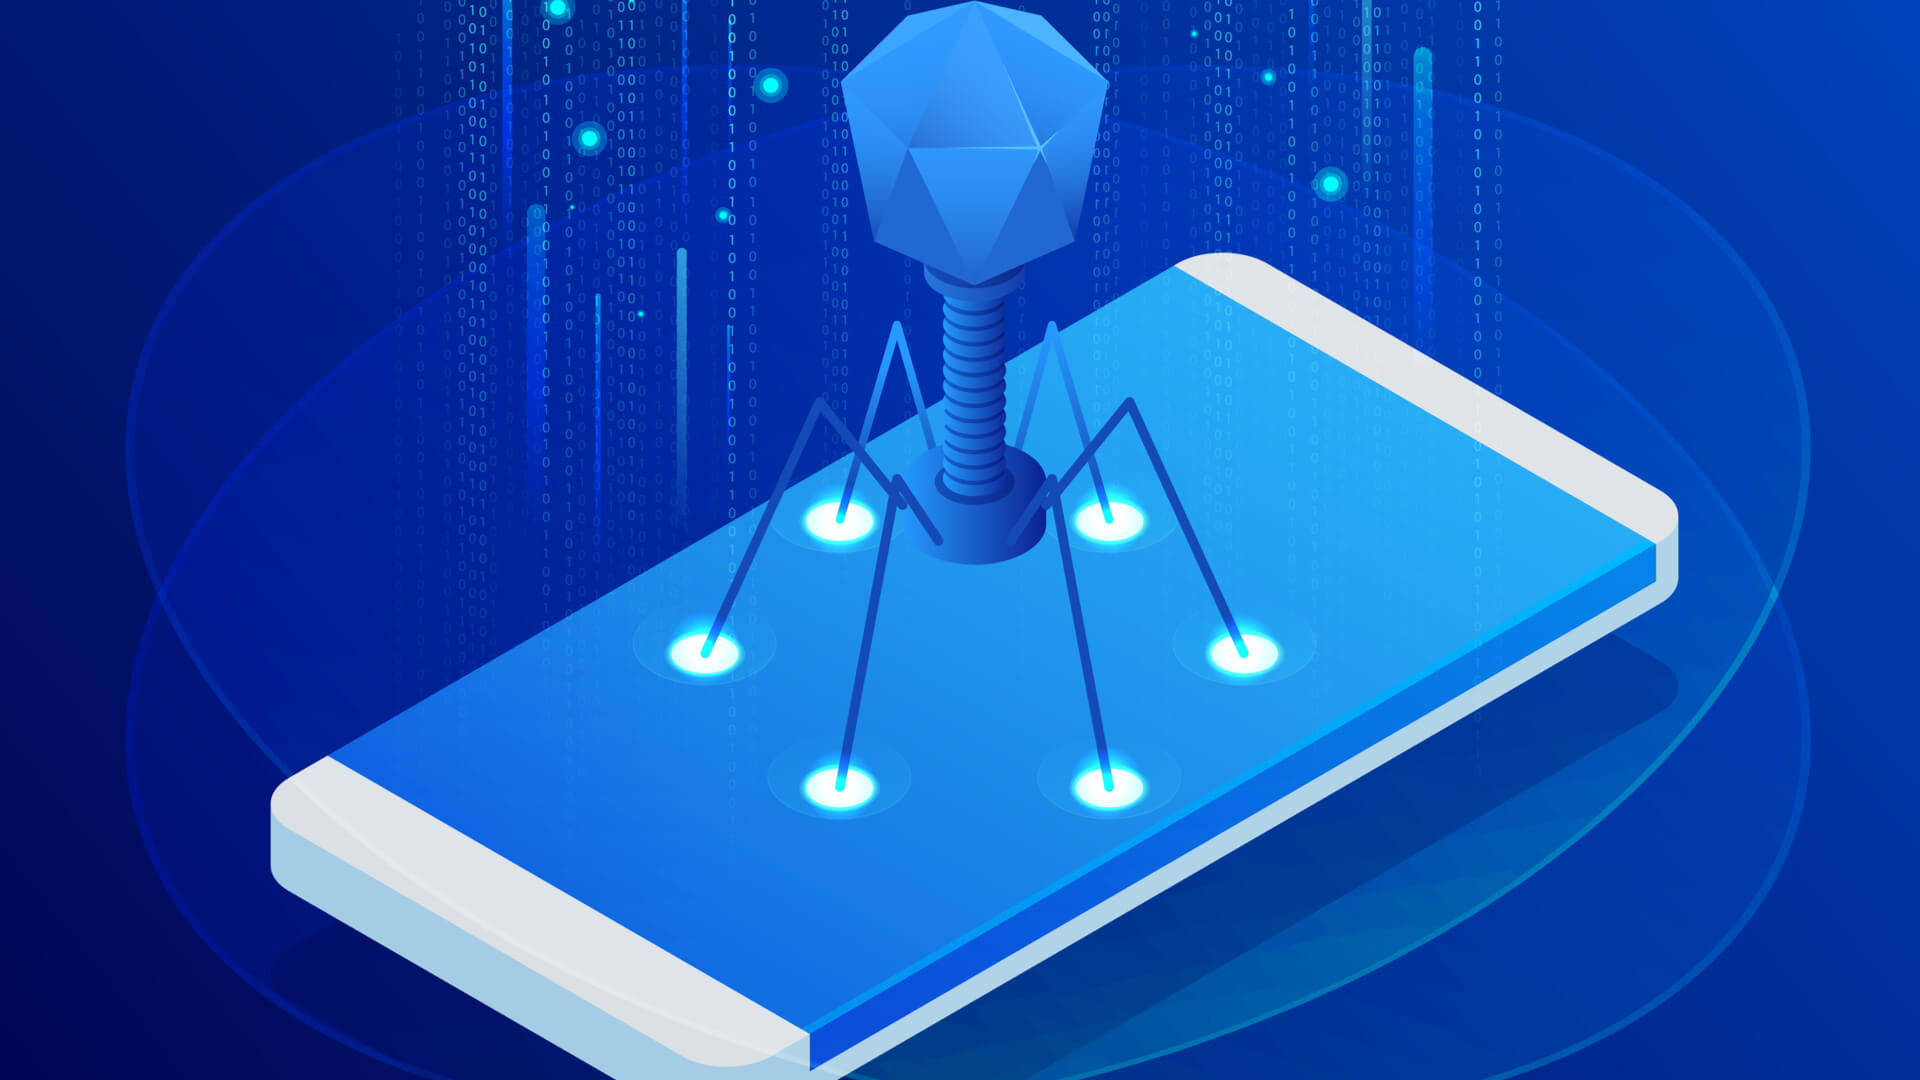 Marware Sxi Mov - Android ransomware rears its ugly head again, uses unusual tricks